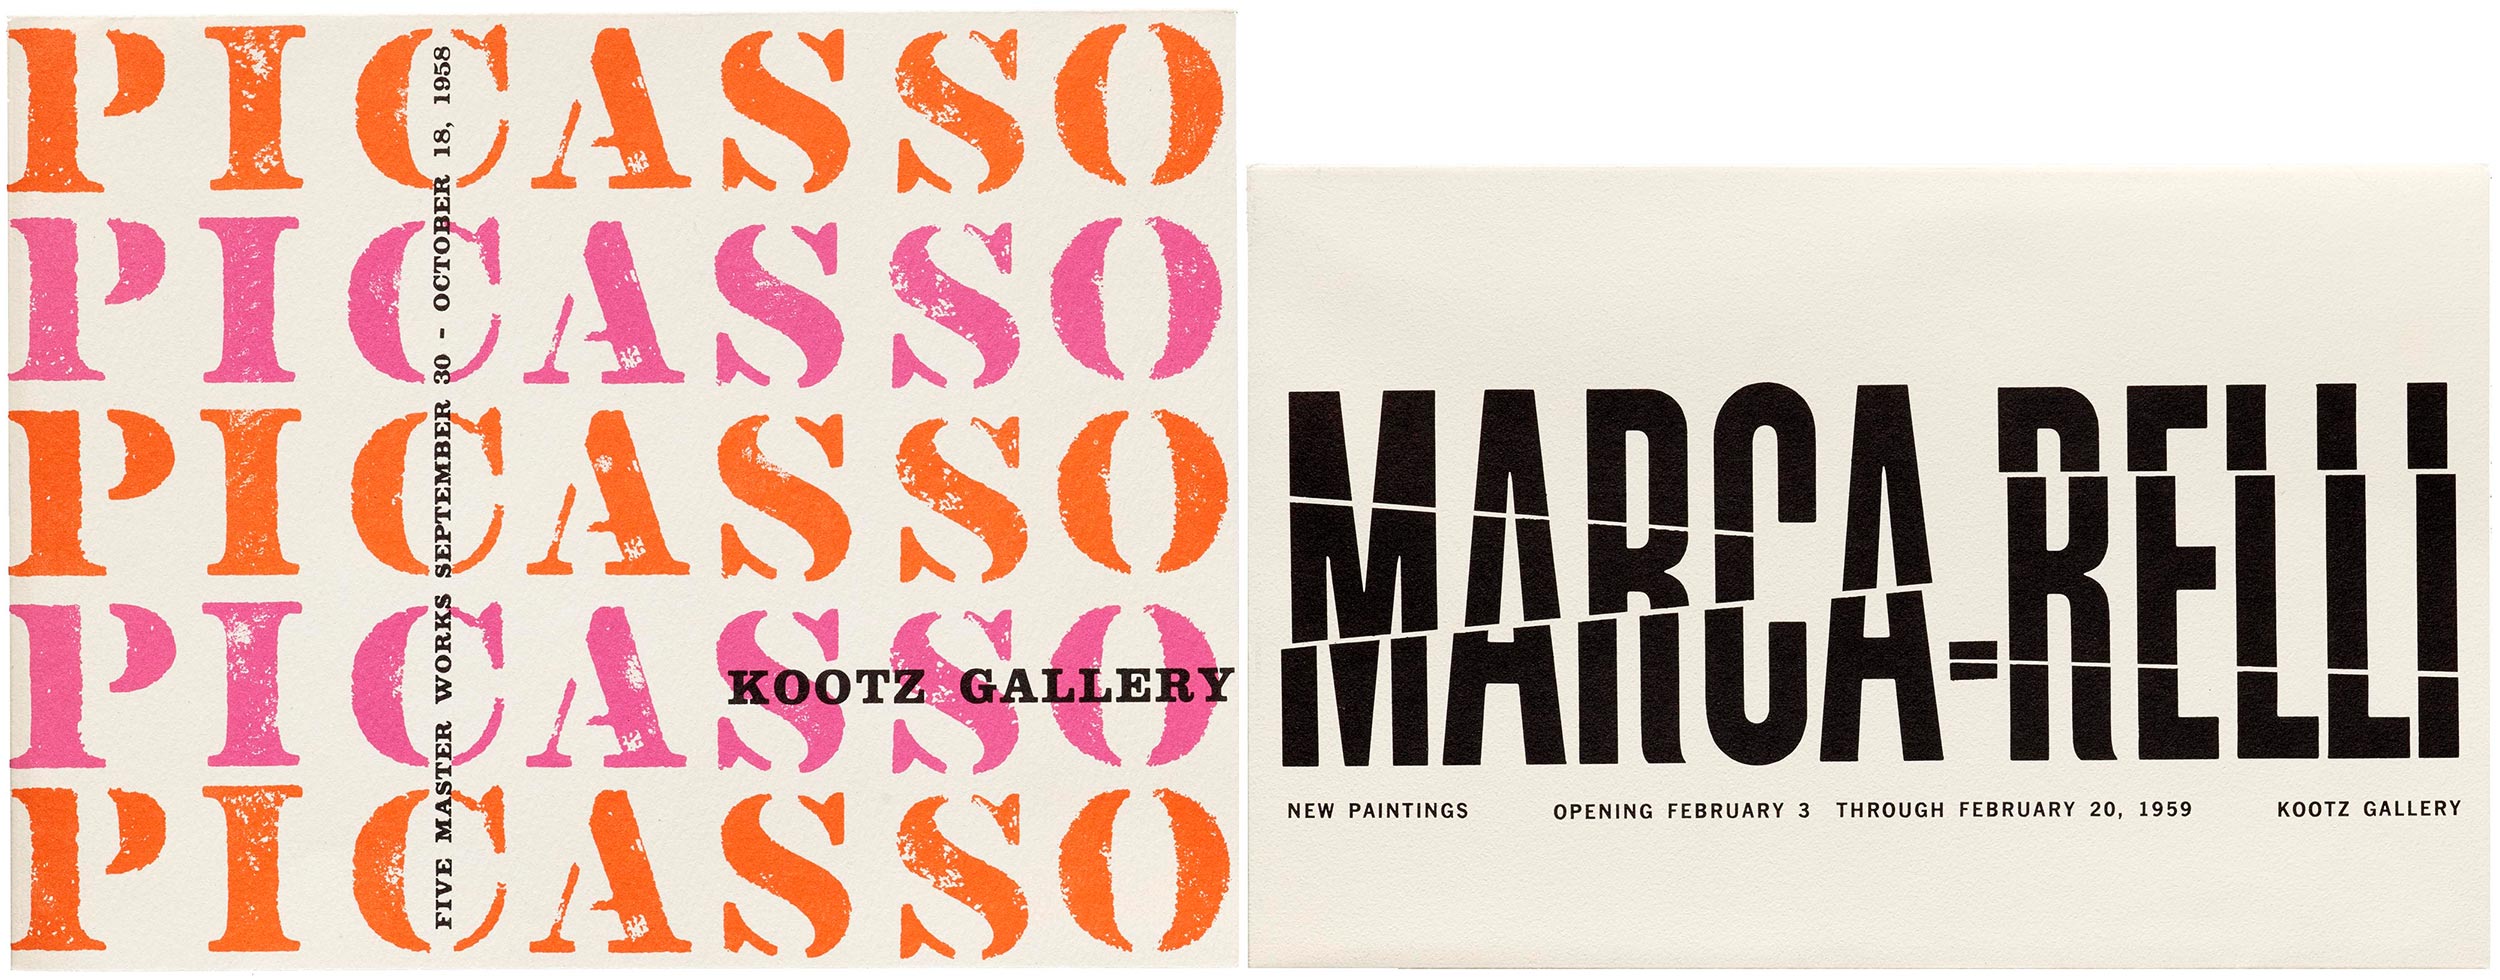 Exhibition catalogs for Picasso: The Master Works and Marca-Relli, Kootz Gallery, New York, 1958-59.